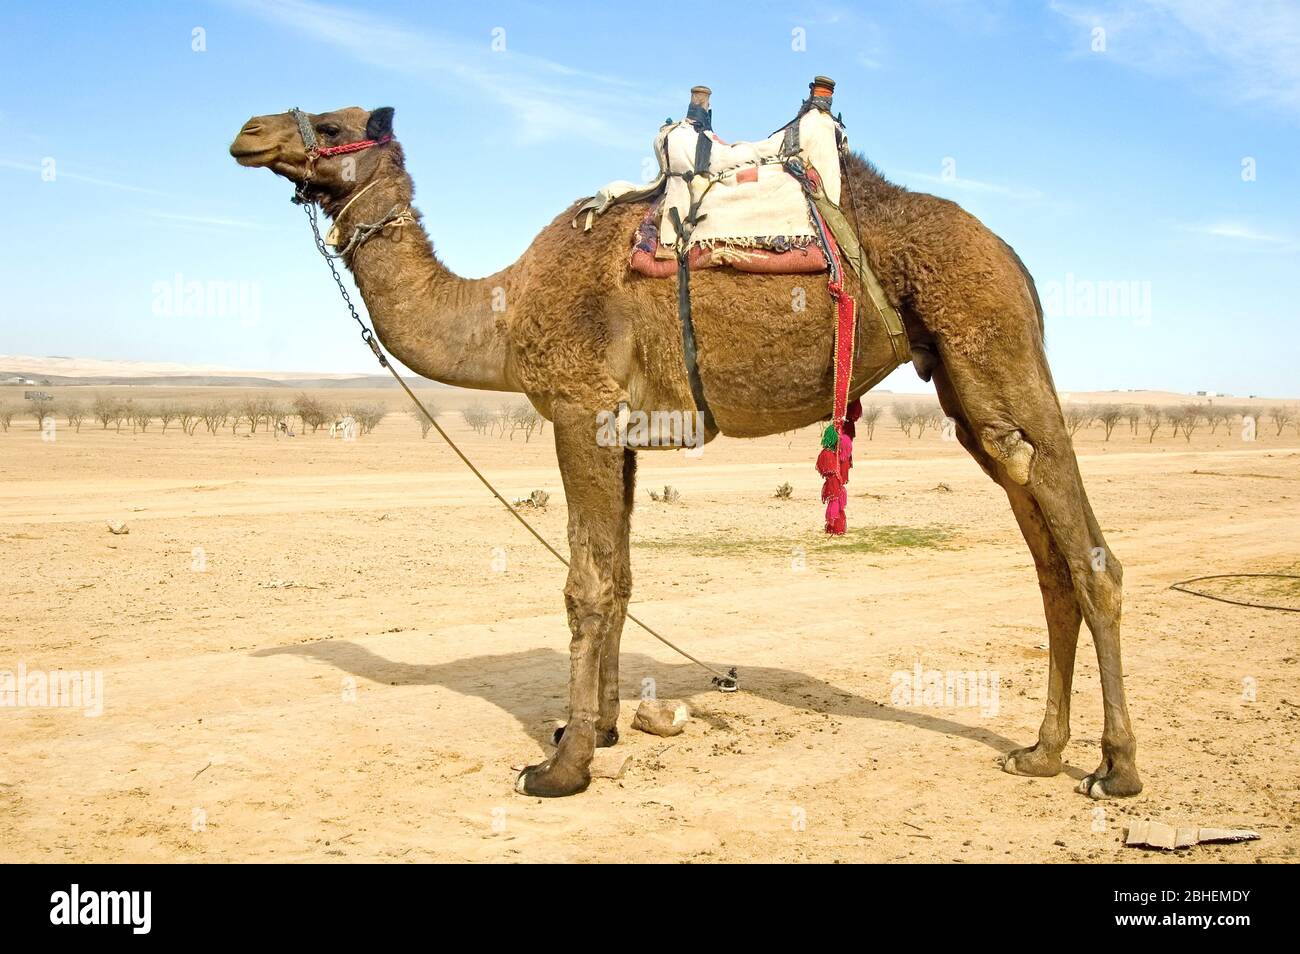 Camel with a saddle stand in the desert Stock Photo - Alamy